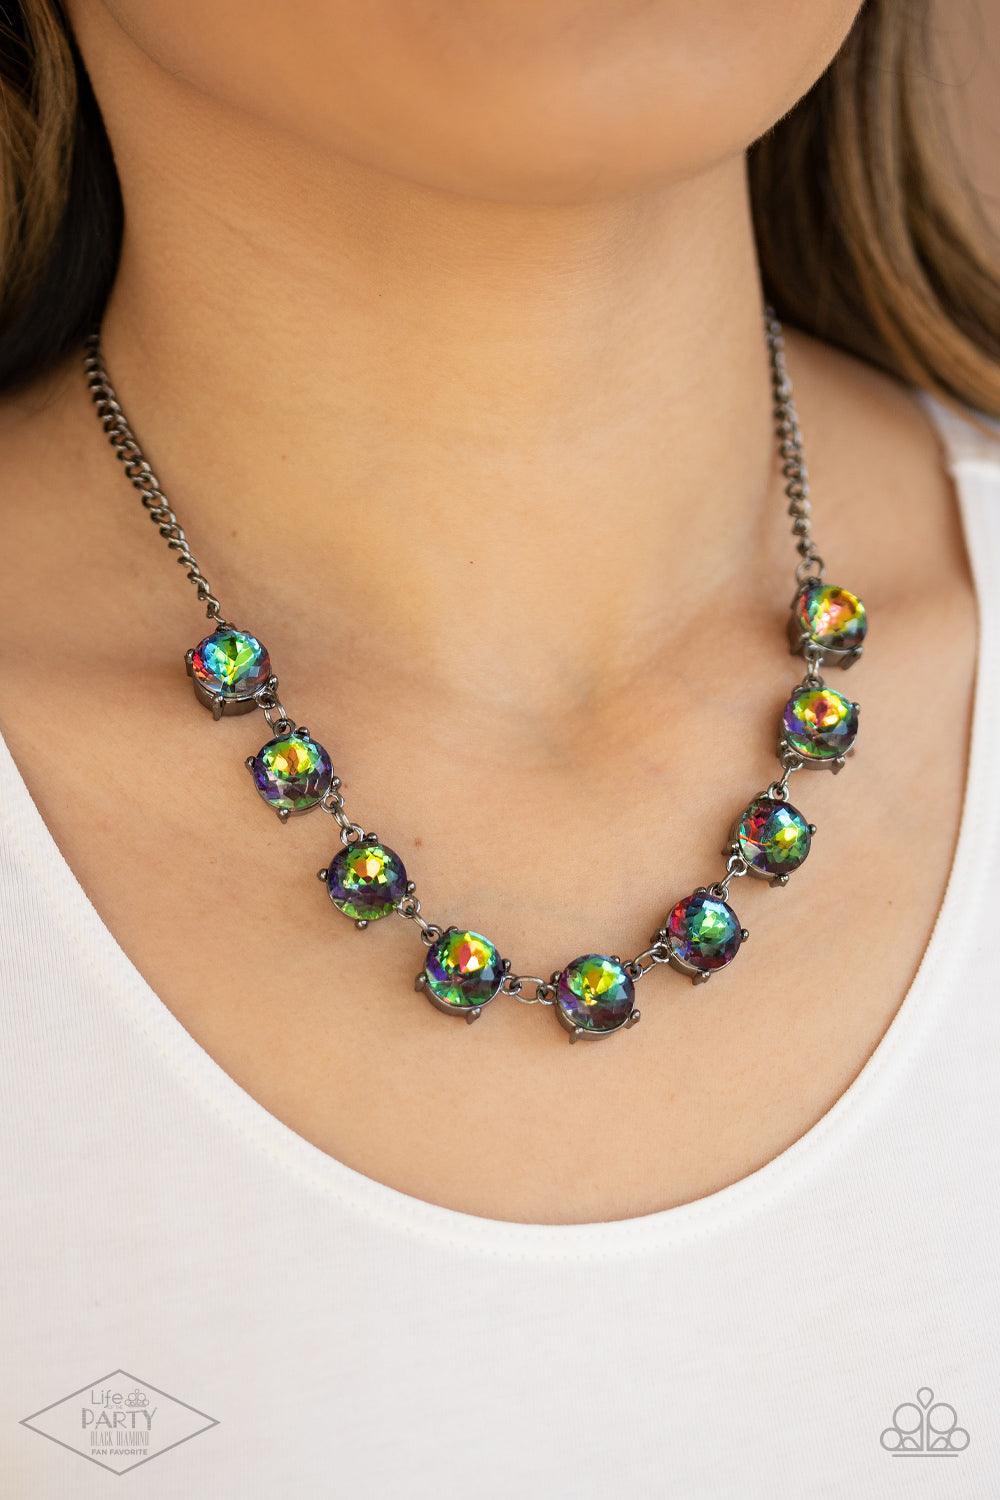 Paparazzi Accessories Iridescent Icing - Multi Featuring oil spill centers and sleek gunmetal fittings, a collection of oversized rhinestones link below the collar for an icy look. Features an adjustable clasp closure. Sold as one individual necklace. Inc